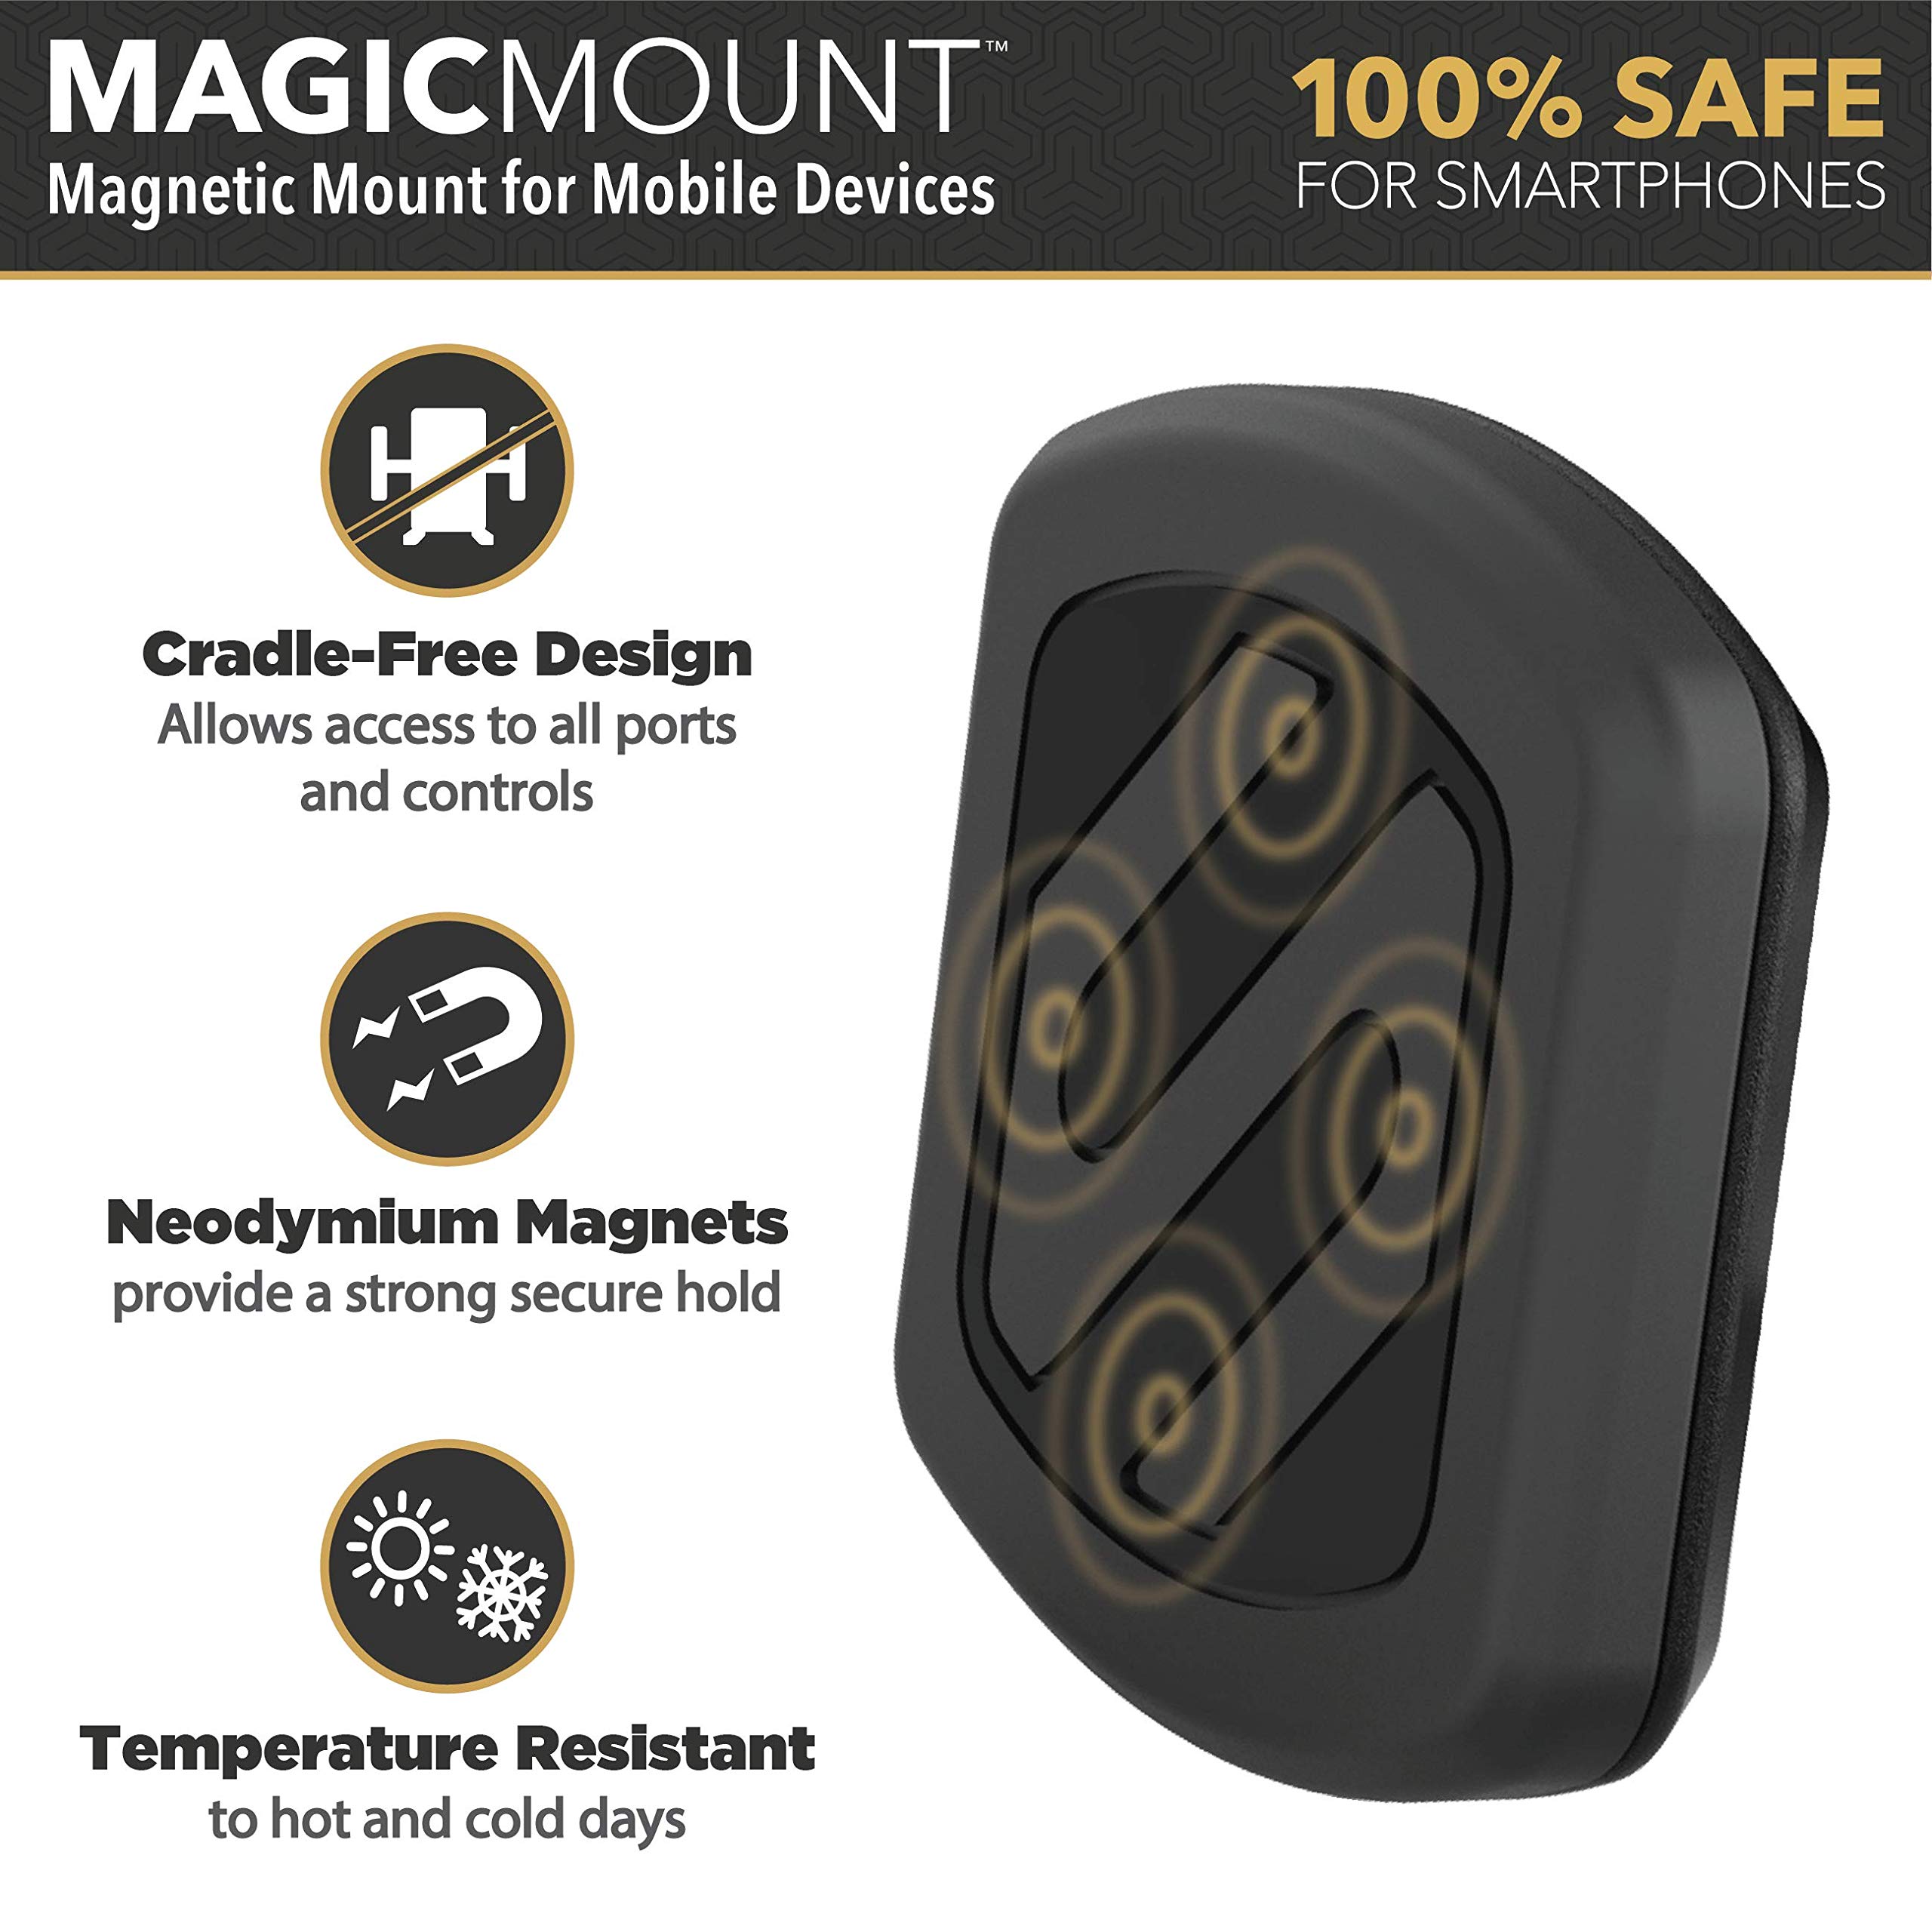 Scosche MAGDM Universal MagicMount Magnetic Phone Holder, Tablet or GPS Mount for Car & Home, Universal Mount, Black XL